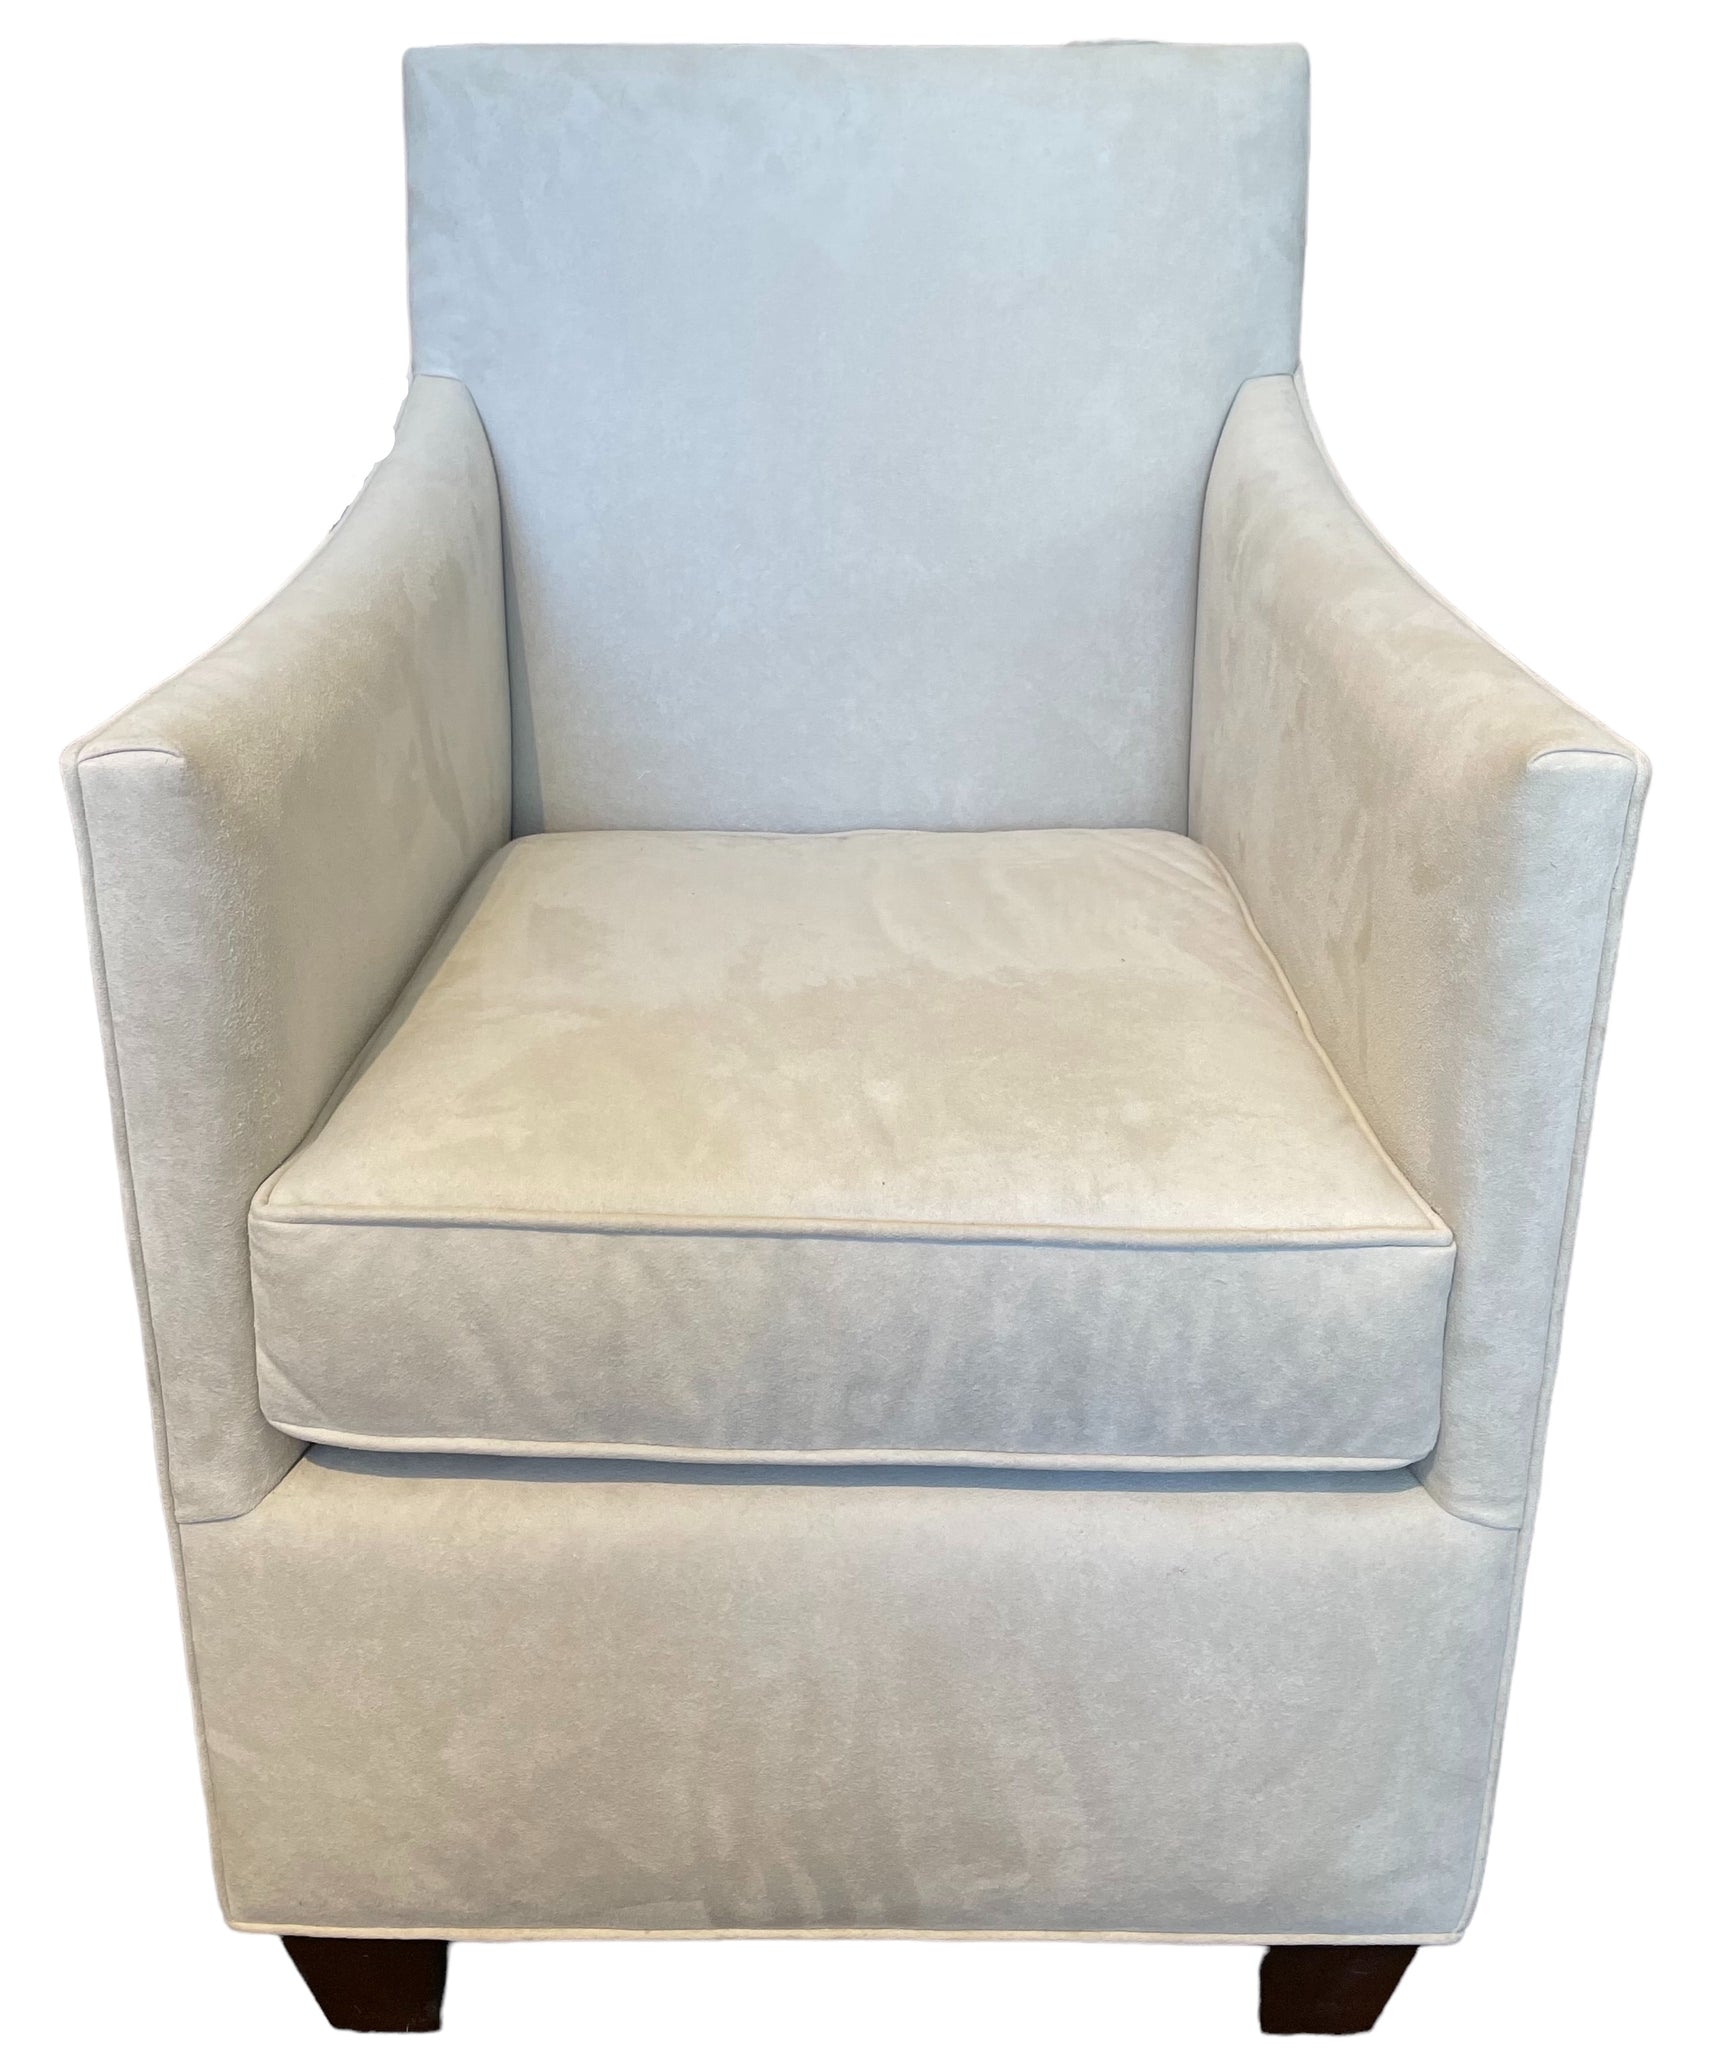 One of Two Newly Upholstered Ultra Suede Chairs with Small Navy Lumbar Pillows